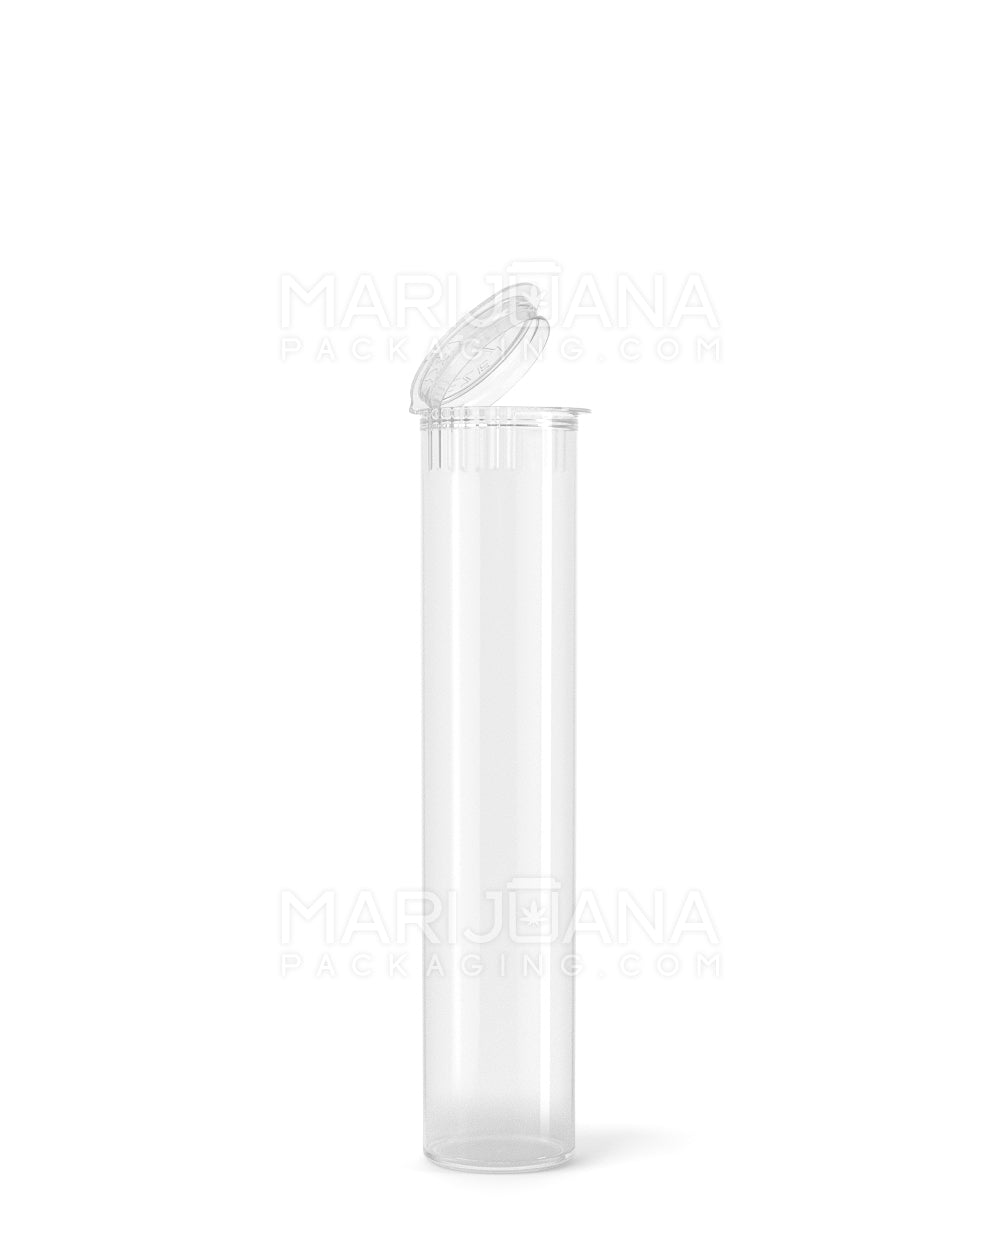 Child Resistant | Pop Top Plastic Pre-Roll Tubes | 90mm - Clear - 1000 Count - 1